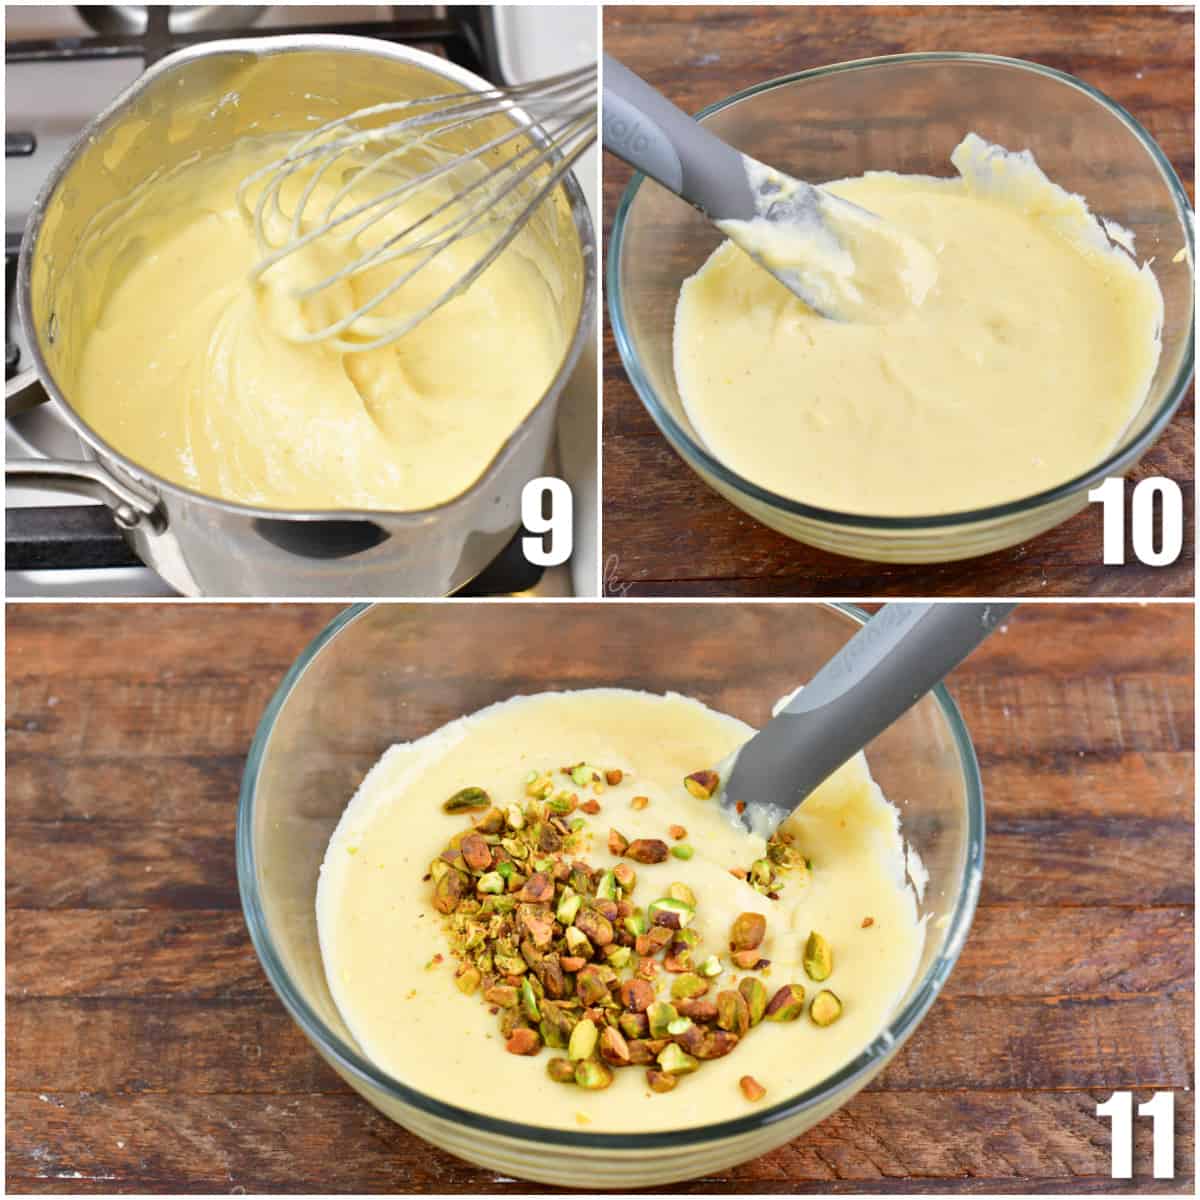 Collage of three images of thickening a pudding in a pot, cooling pudding in a bowl, adding pistachios to pudding.